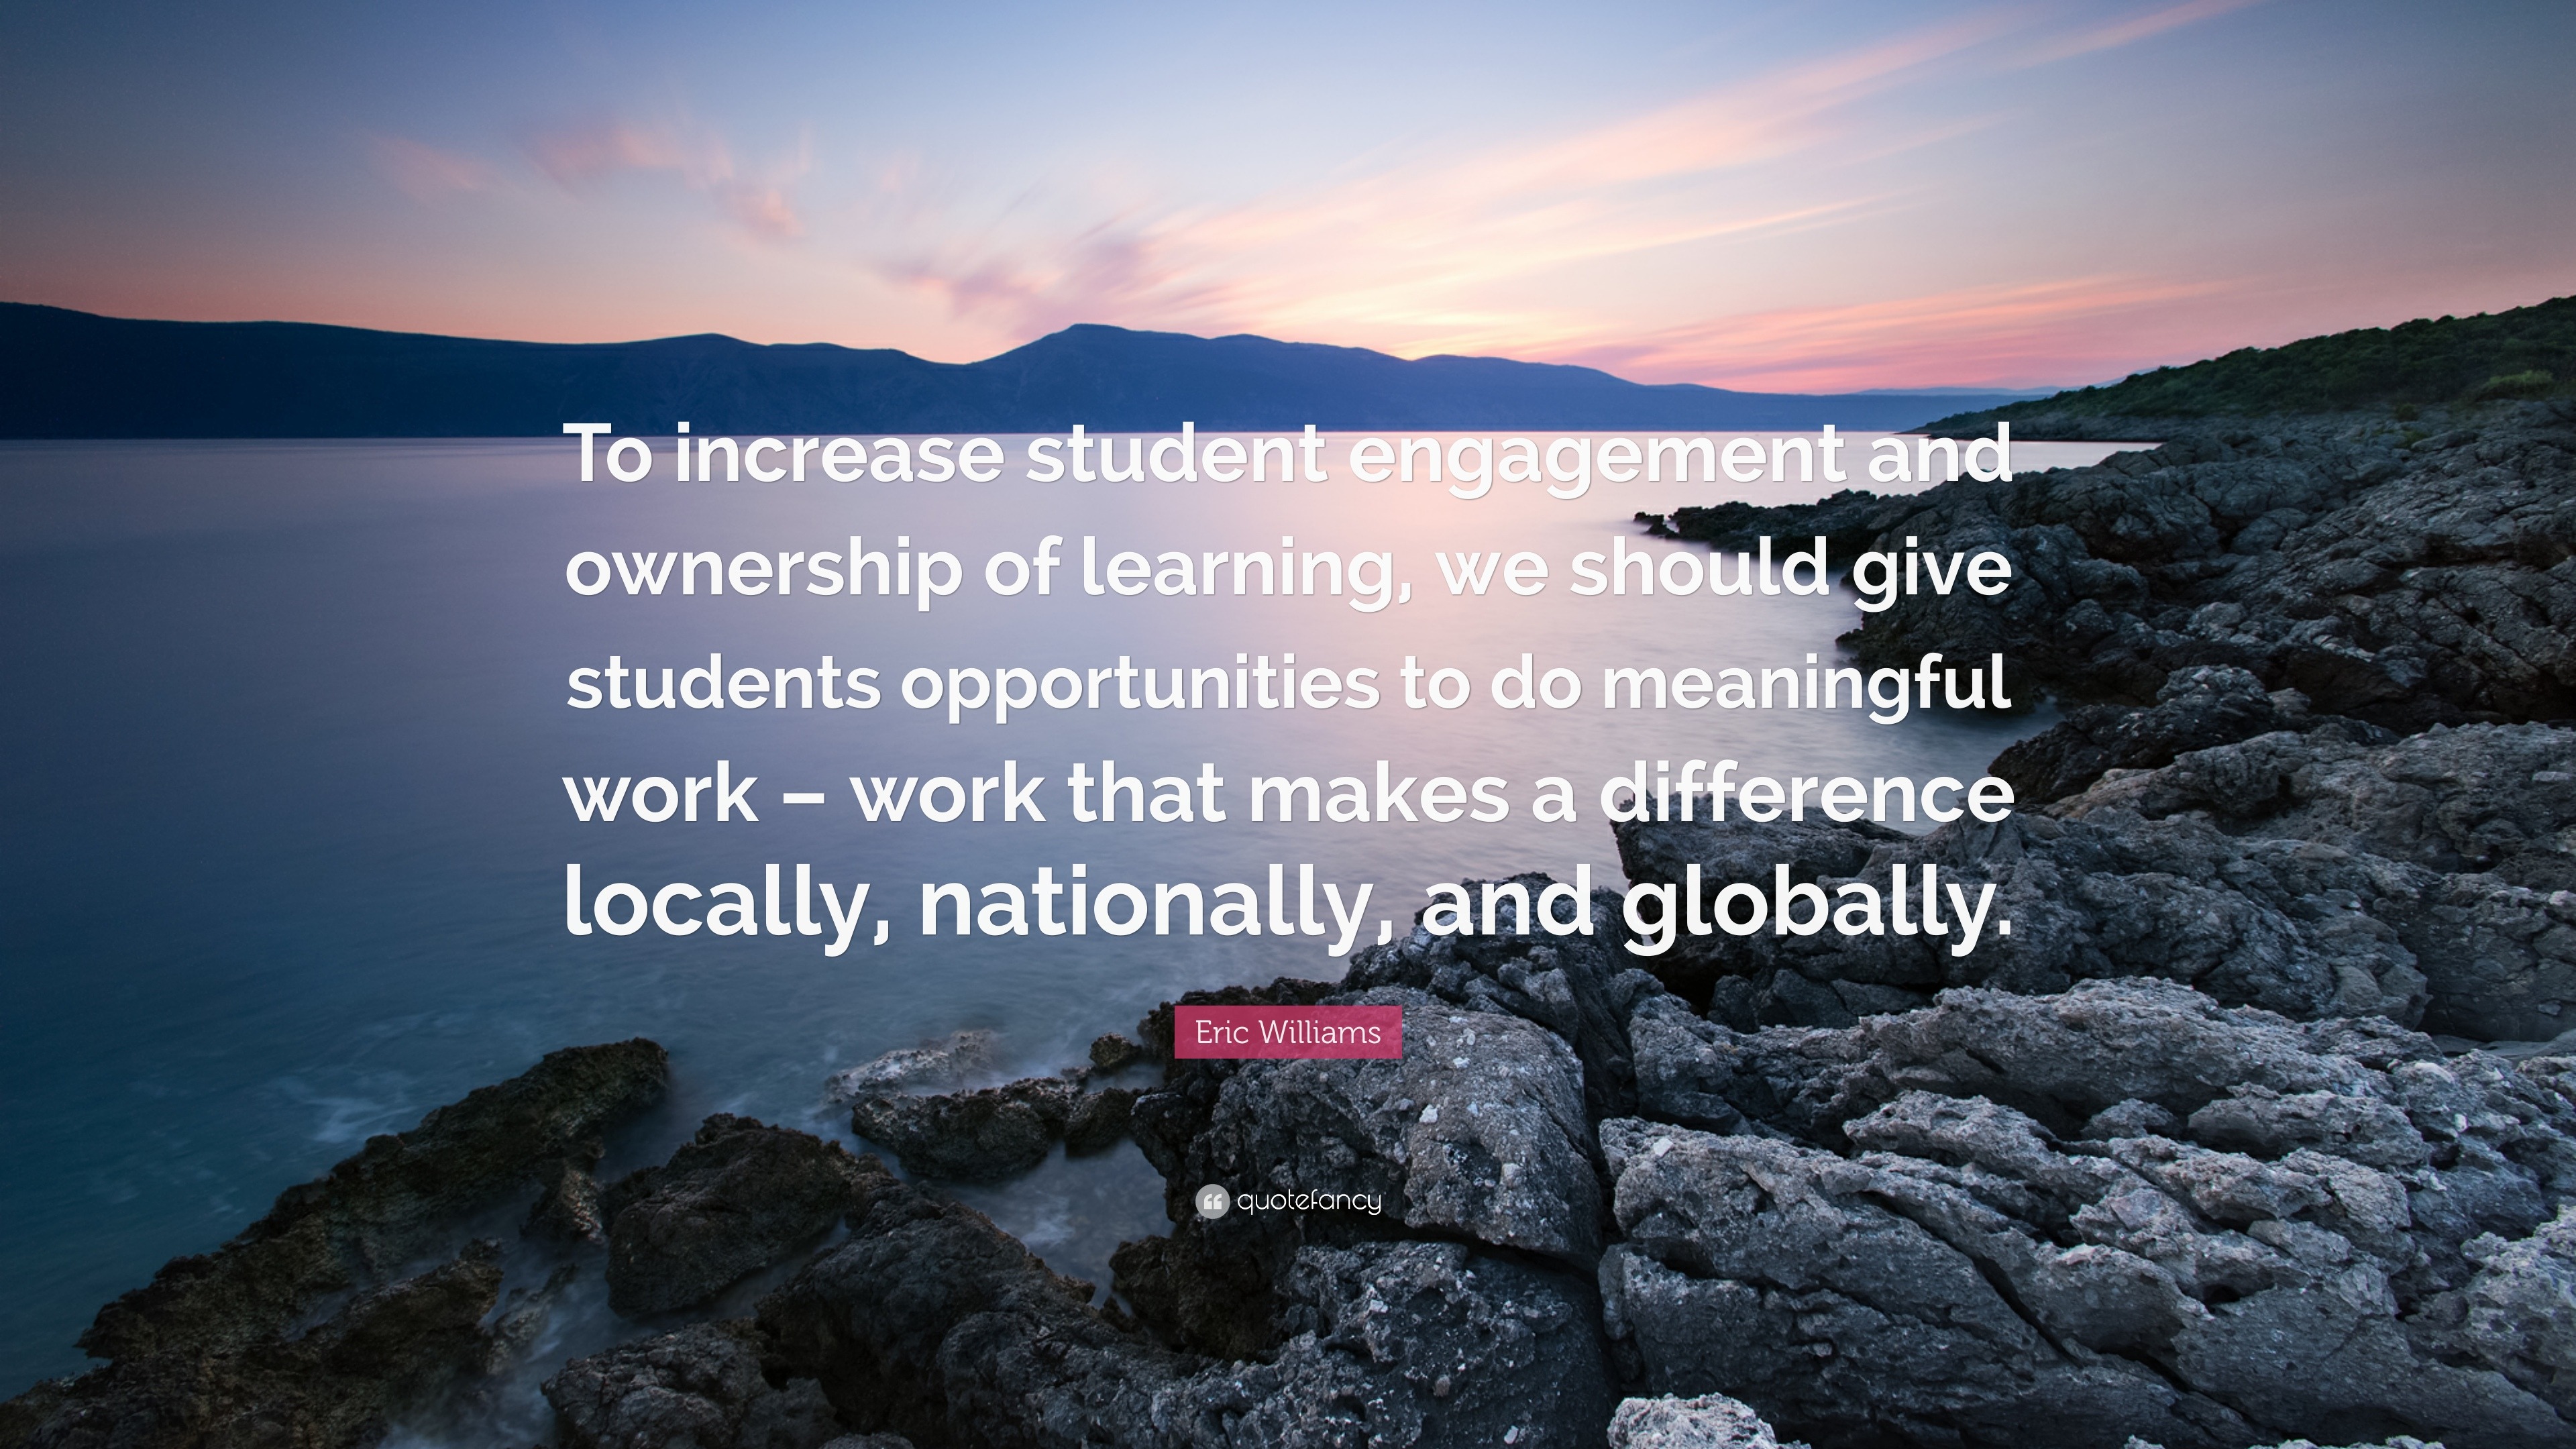 Eric Williams Quote: “To increase student engagement and ownership of